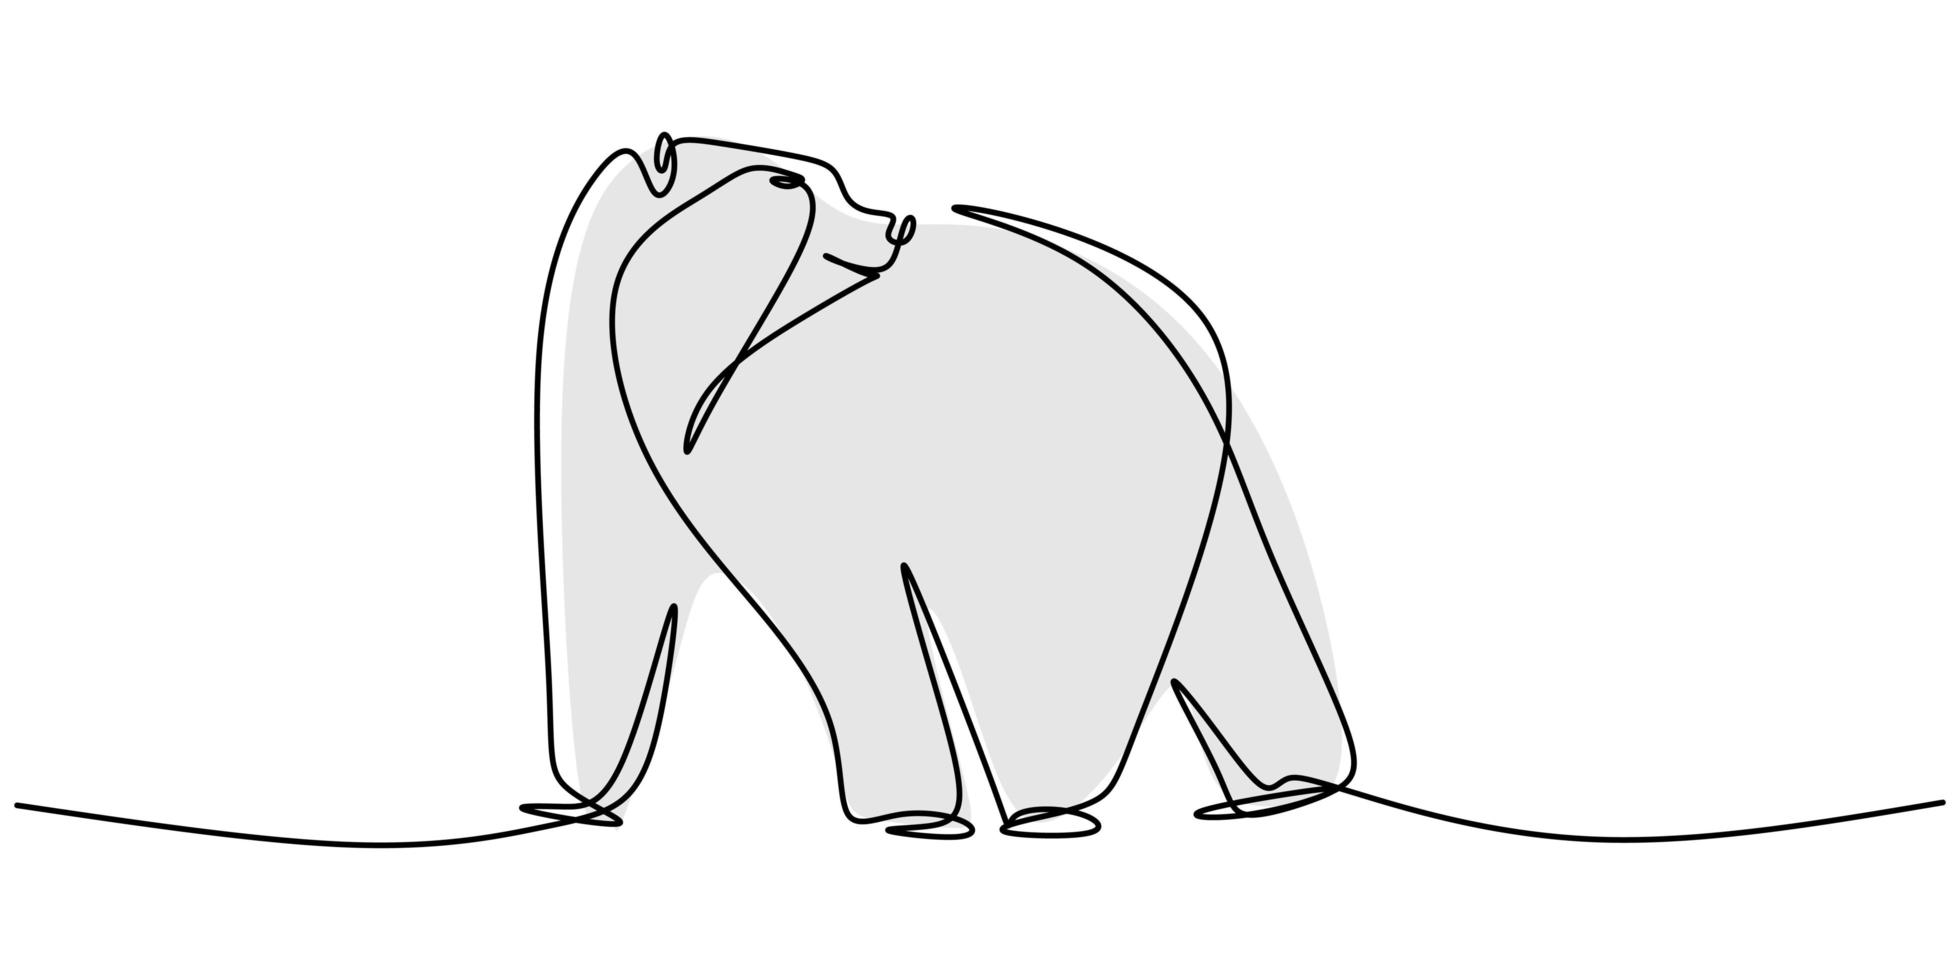 Continuous line drawing of bear wild animal vector illustration.